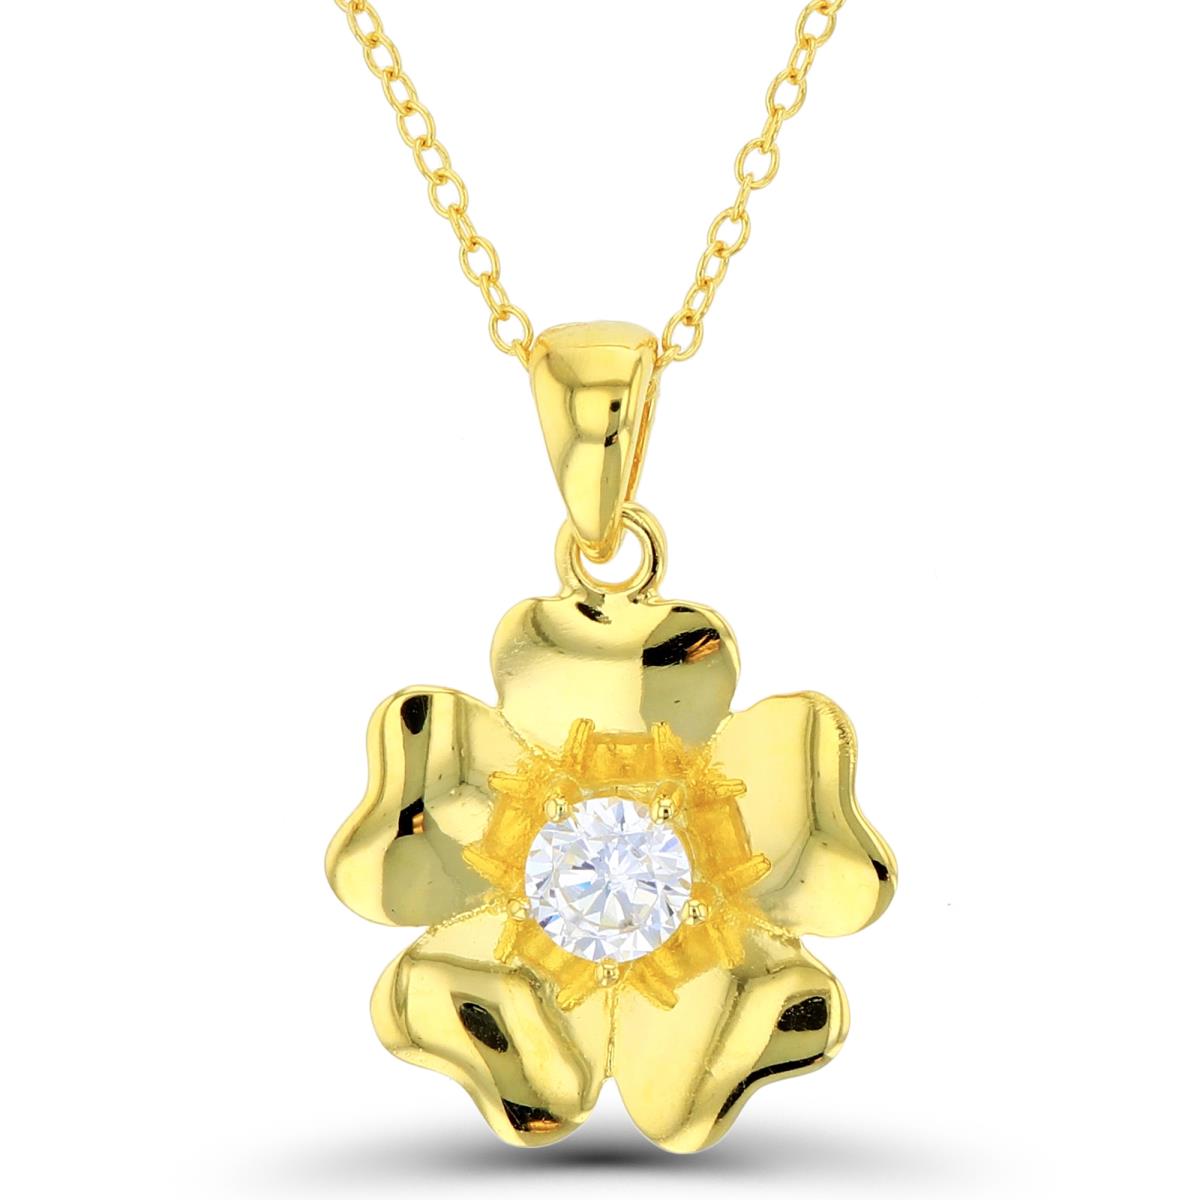 Sterling Silver+1Micron Yellow Gold 4.5mm Rnd White CZ High Polish Flower 16+2"Necklace